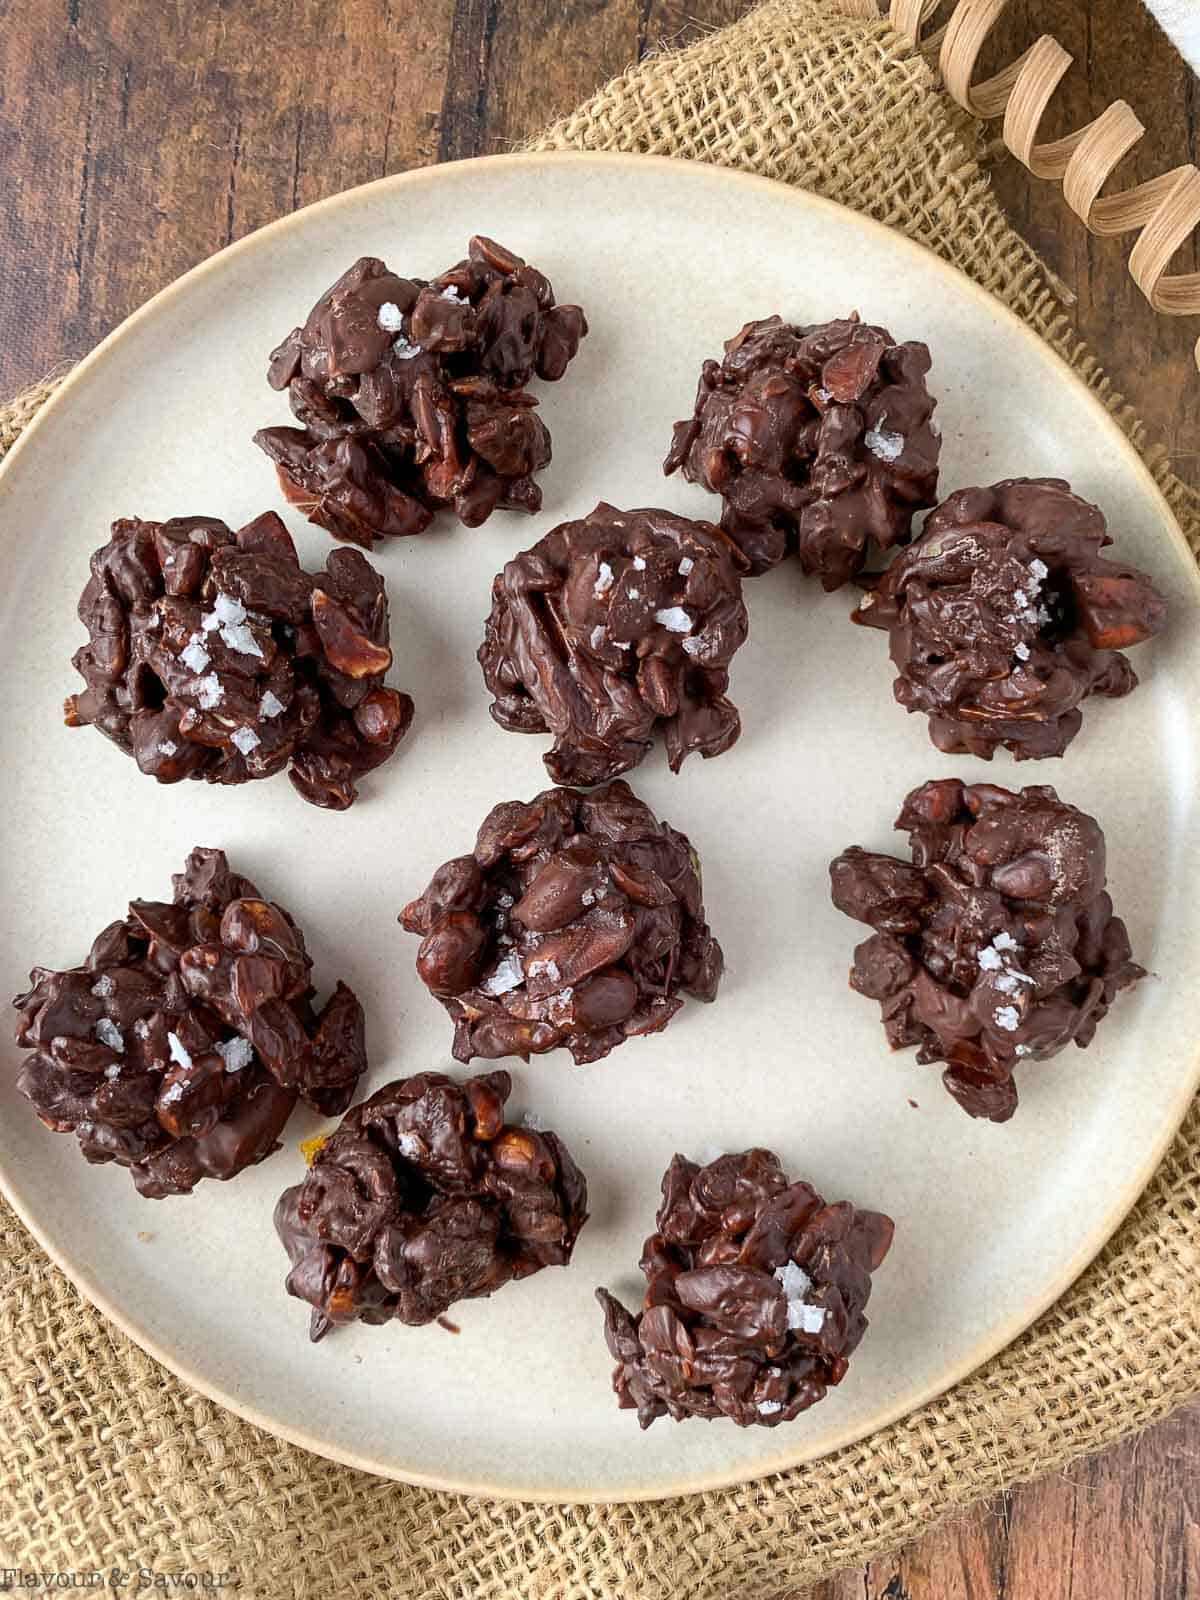 overhead view of chocolate nut clusters with nuts, seeds and dried fruit on a plate